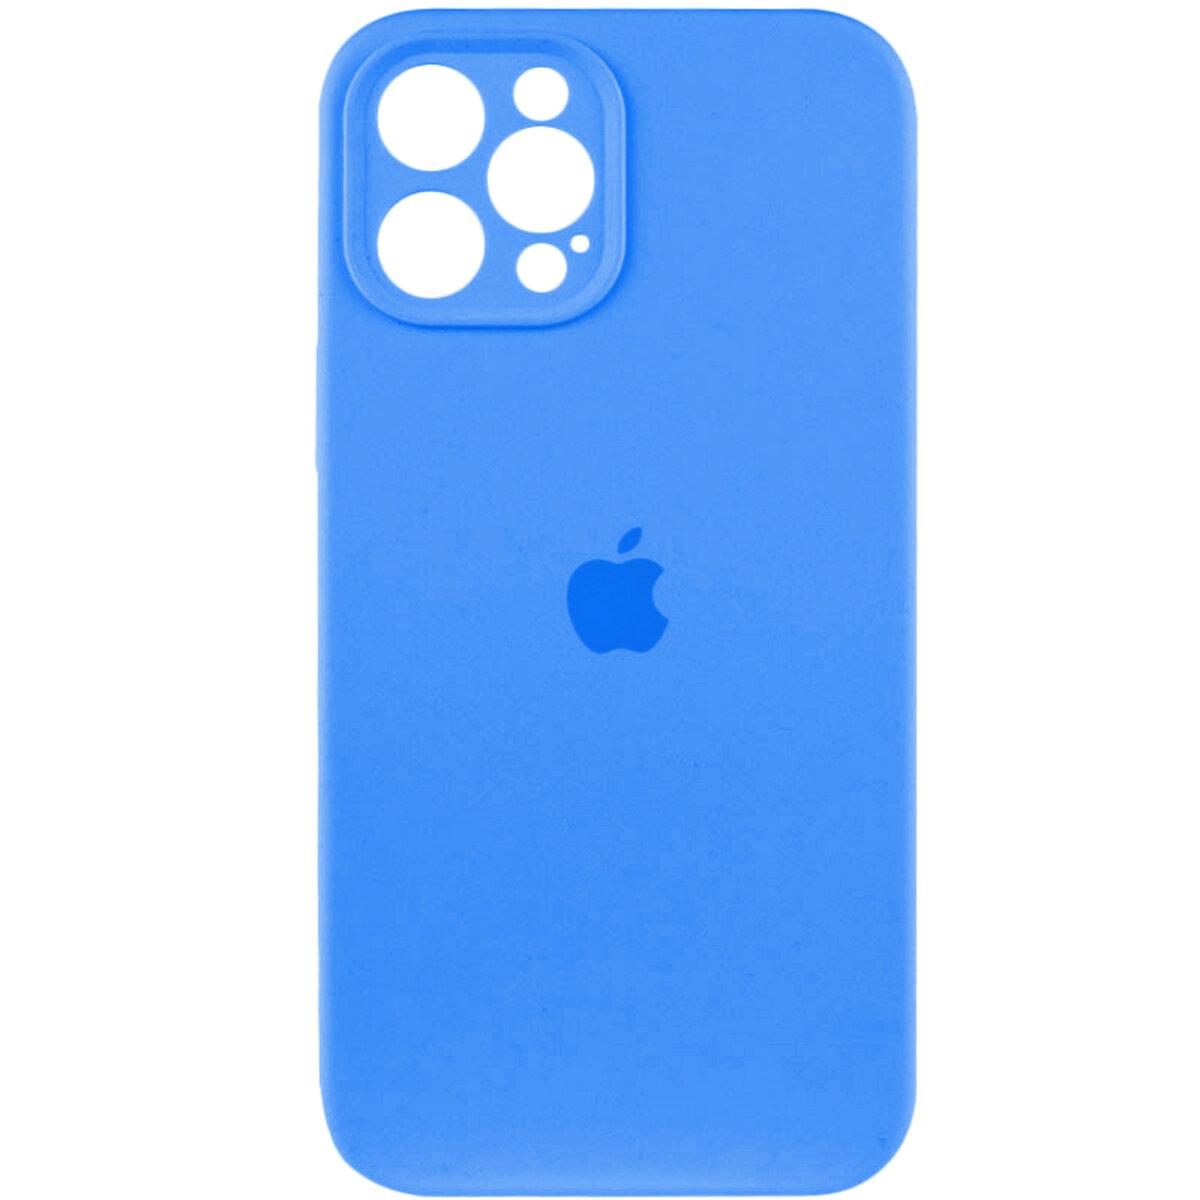 Чохол для смартфона Silicone Full Case AA Camera Protect for Apple iPhone 11 Pro Max 38,Surf Blue